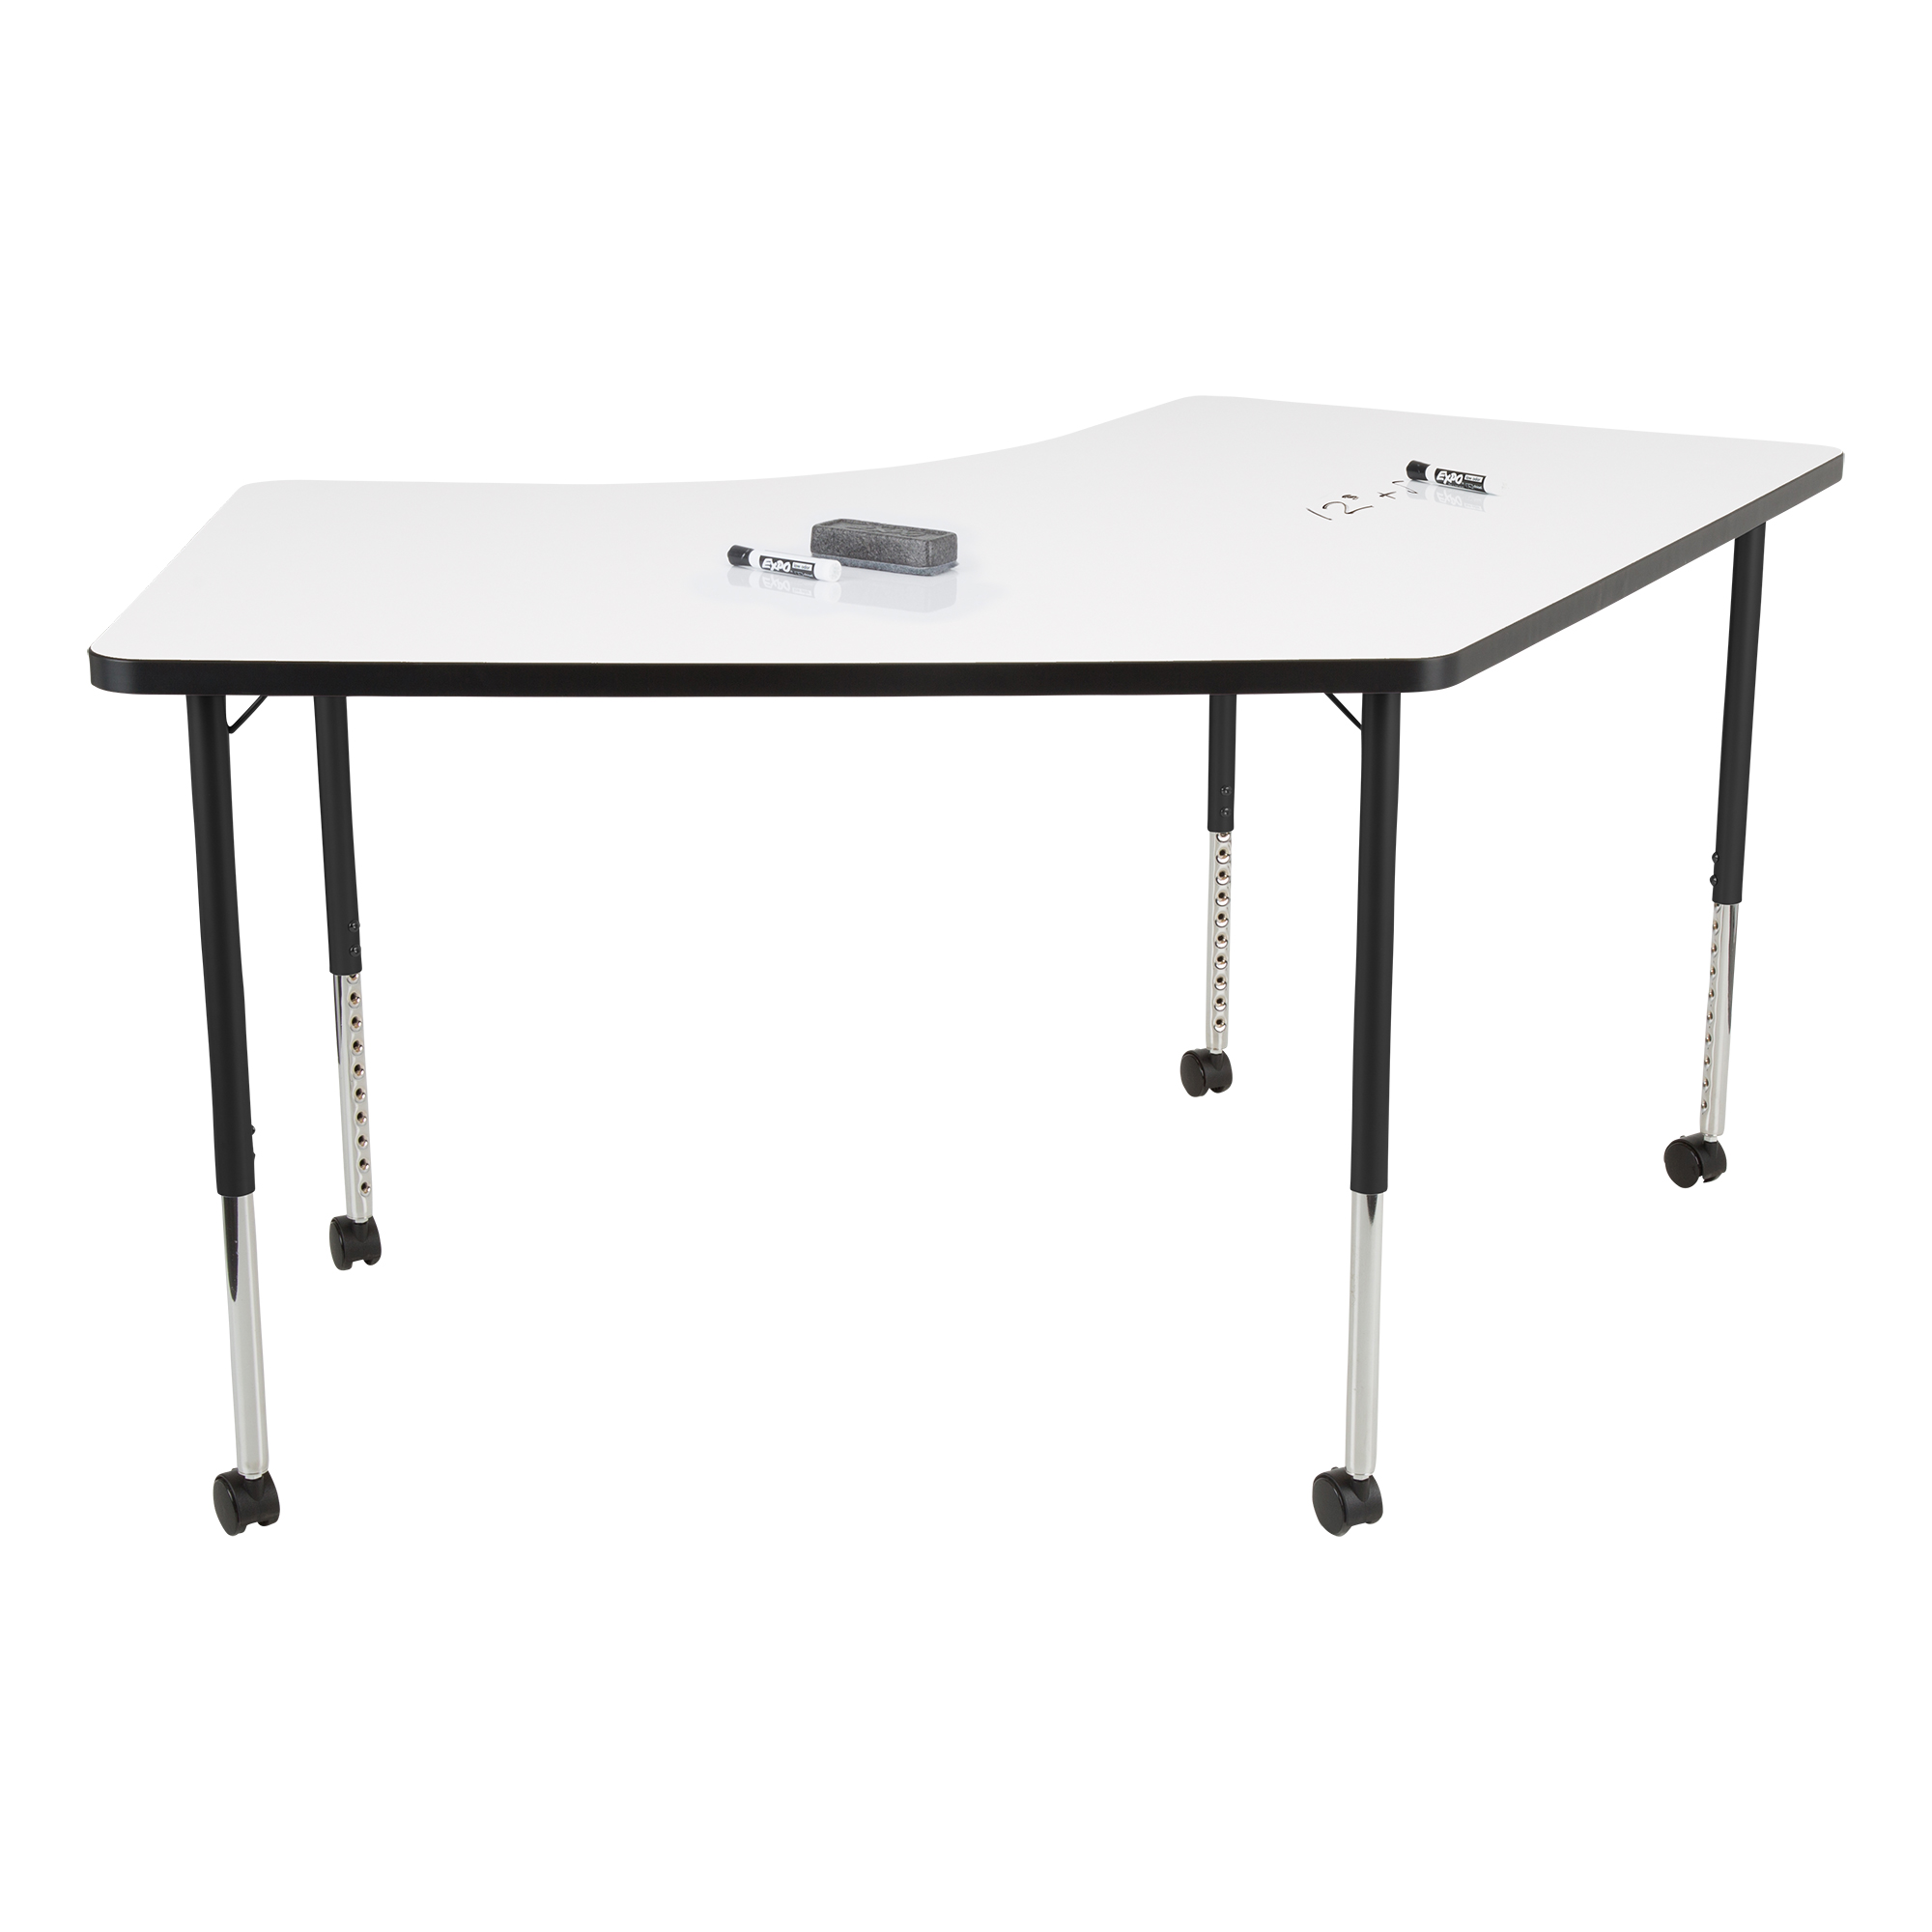 30 x 60 inch Whiteboard Top and Black Edge FDP Dry-Erase Rectangle Activity School and Office Table Standard Legs with Ball Glides Adjustable Height 19-30 inches